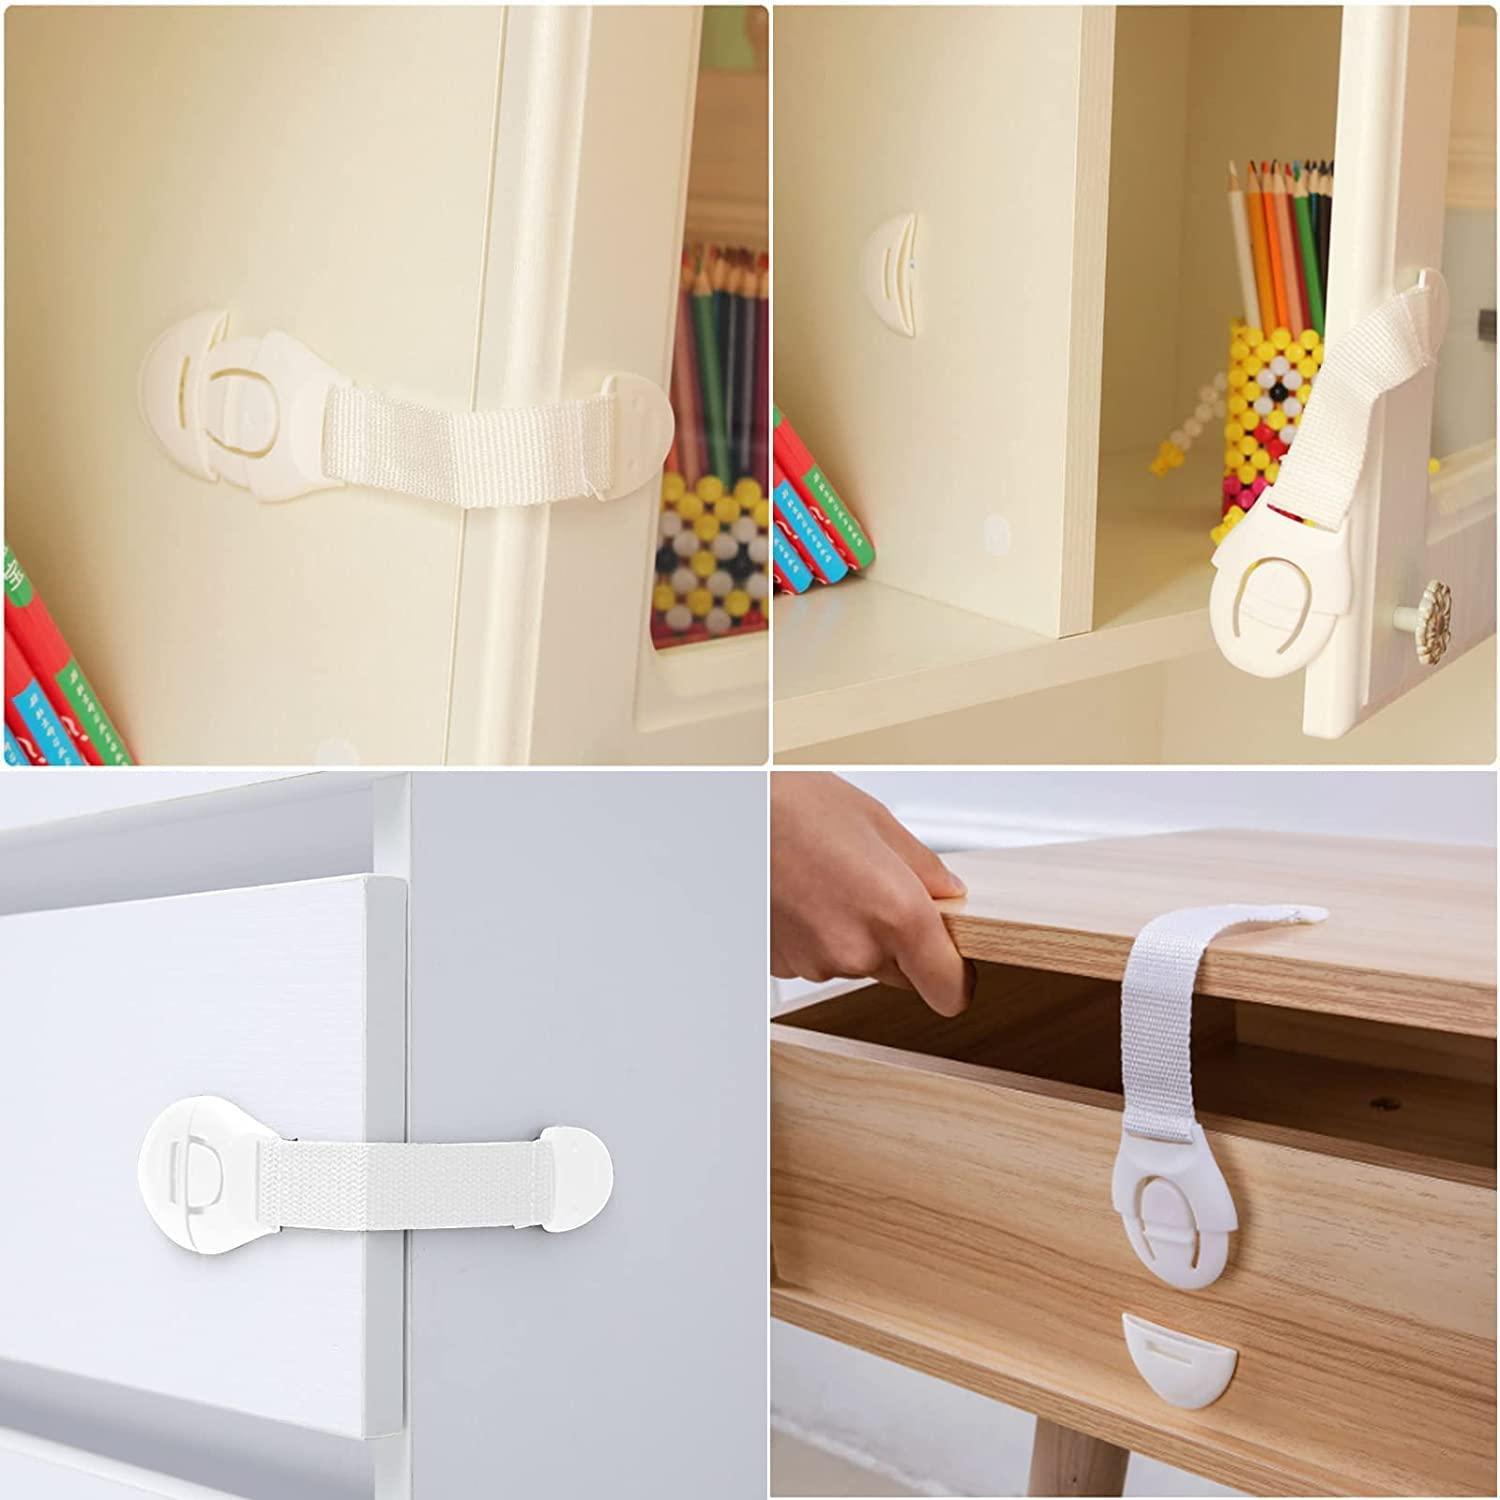 4 Pack Baby Locks Child Safety Strap Locks, Safe Quick and Easy Adhesive  Cabinet Drawer Door Latches for Fridge, Cabinets, Drawers, Dishwasher